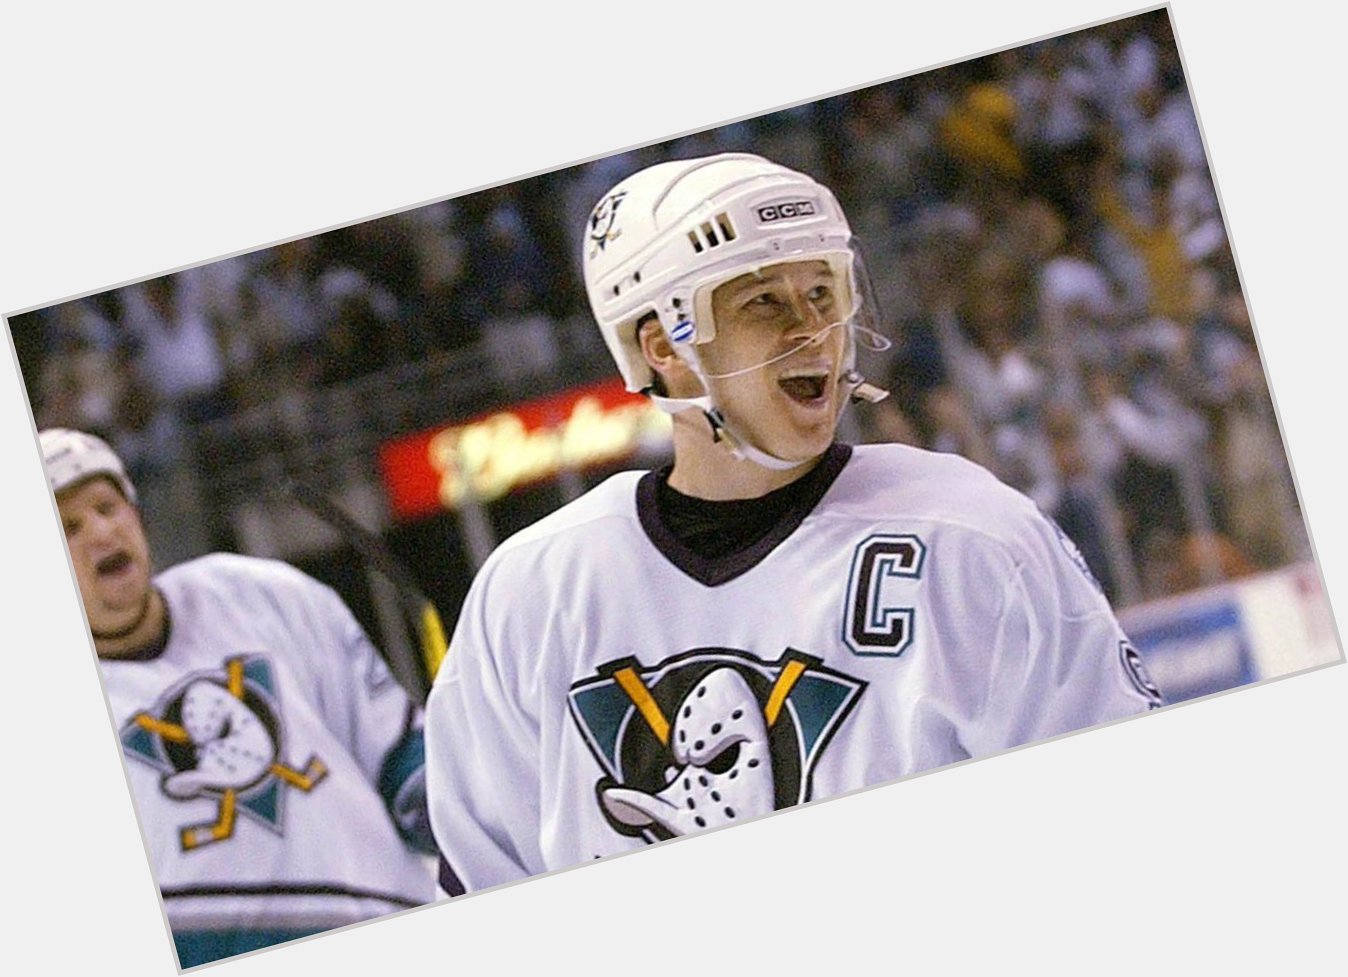 Happy birthday to the most sacred player to put on a Mighty Ducks jersey, Paul Kariya 